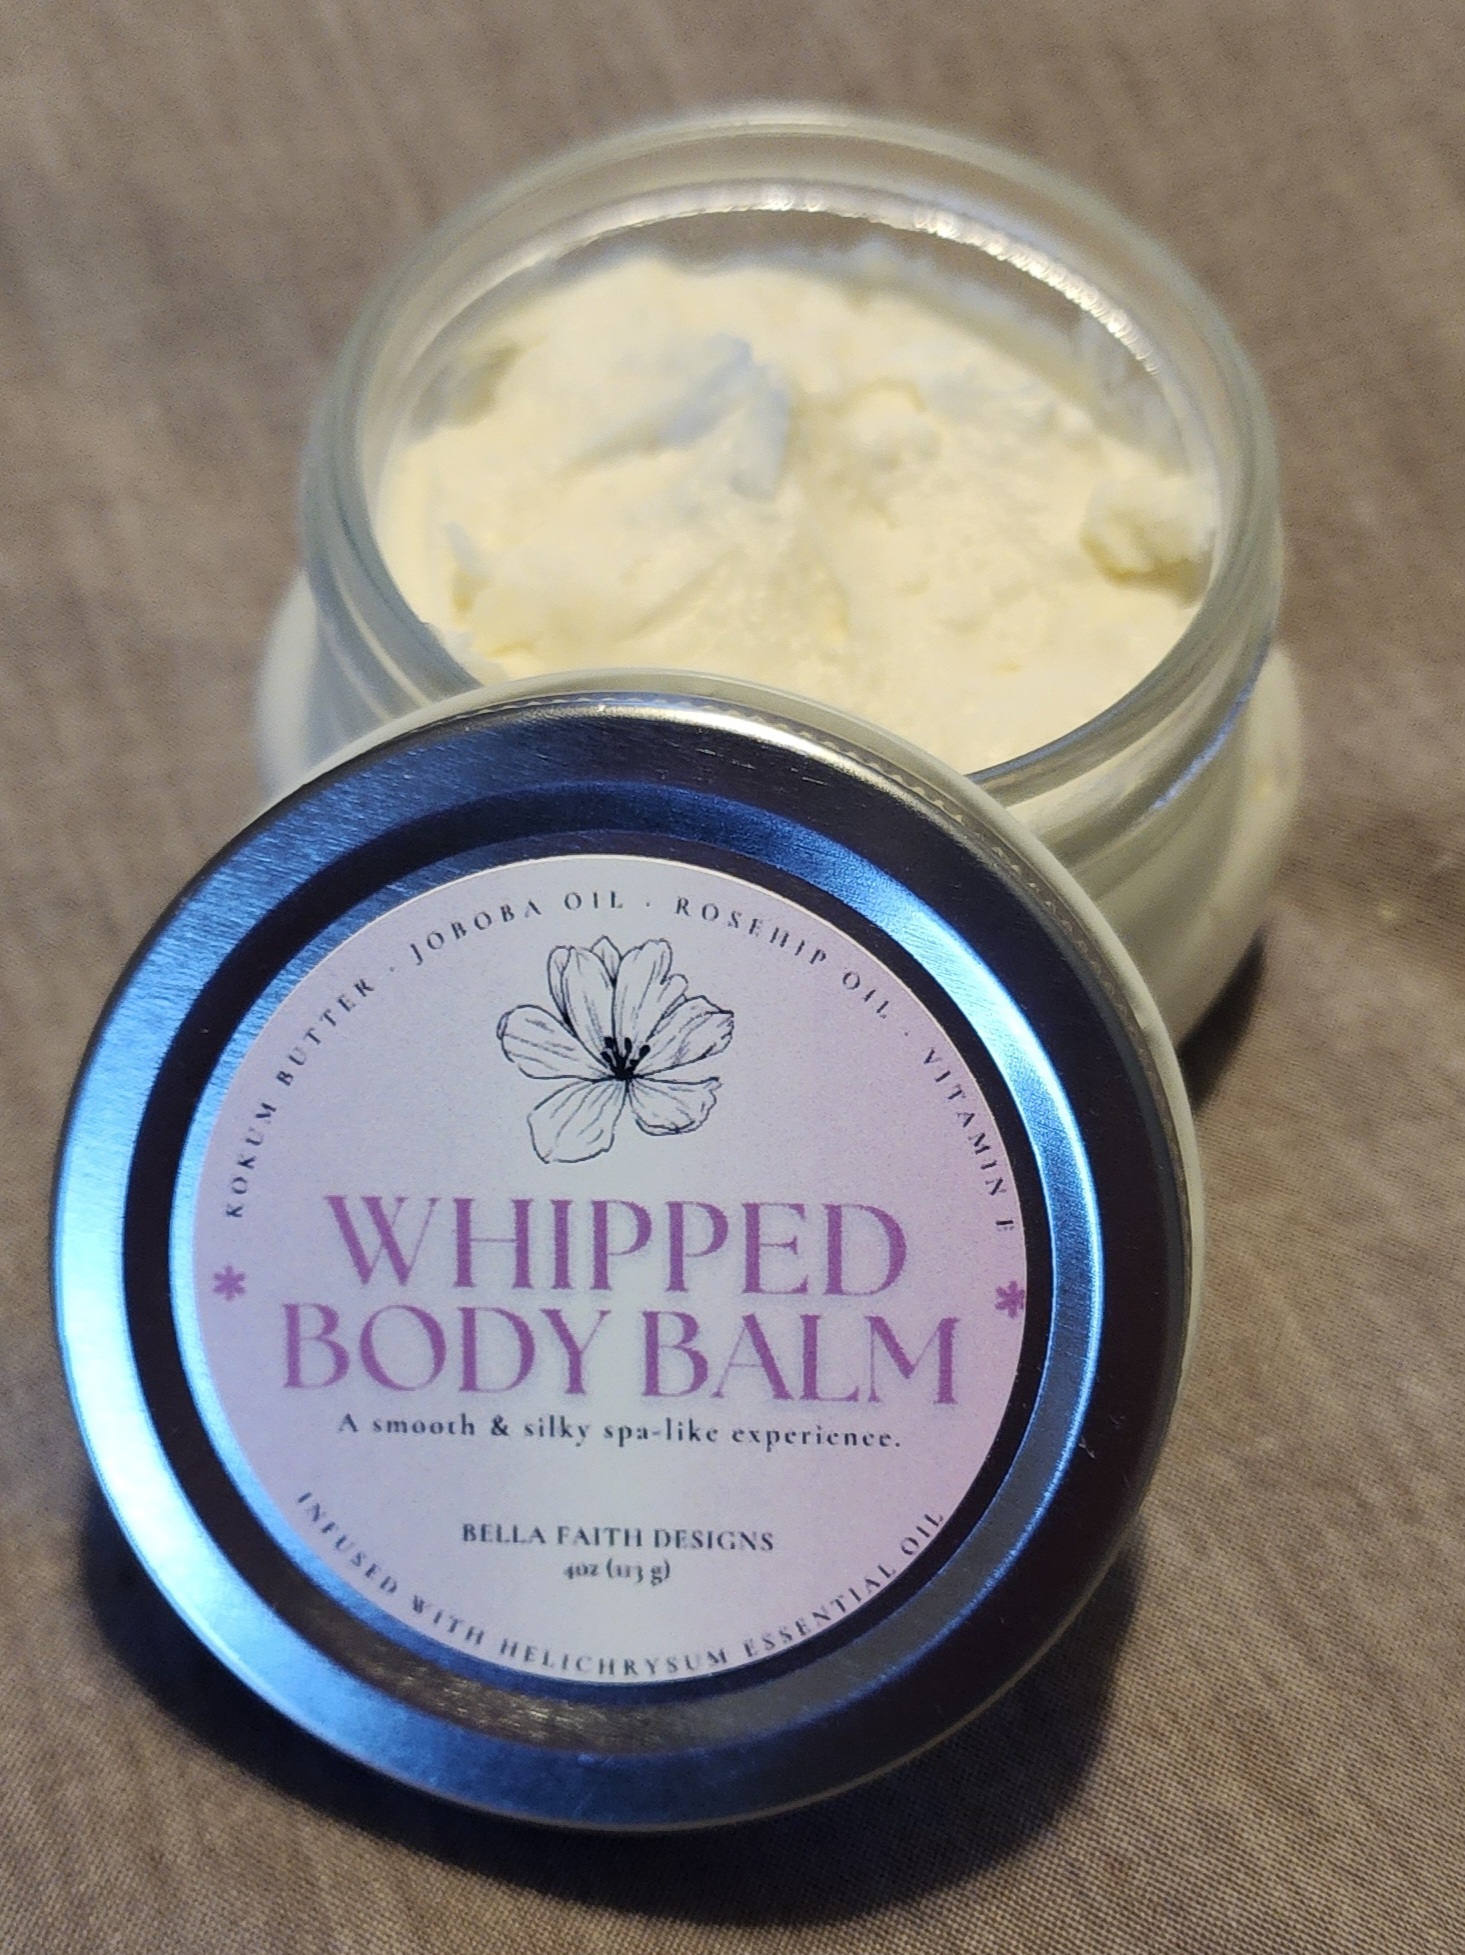 2oz glass jar with lid for homemade whipped body butter balm.